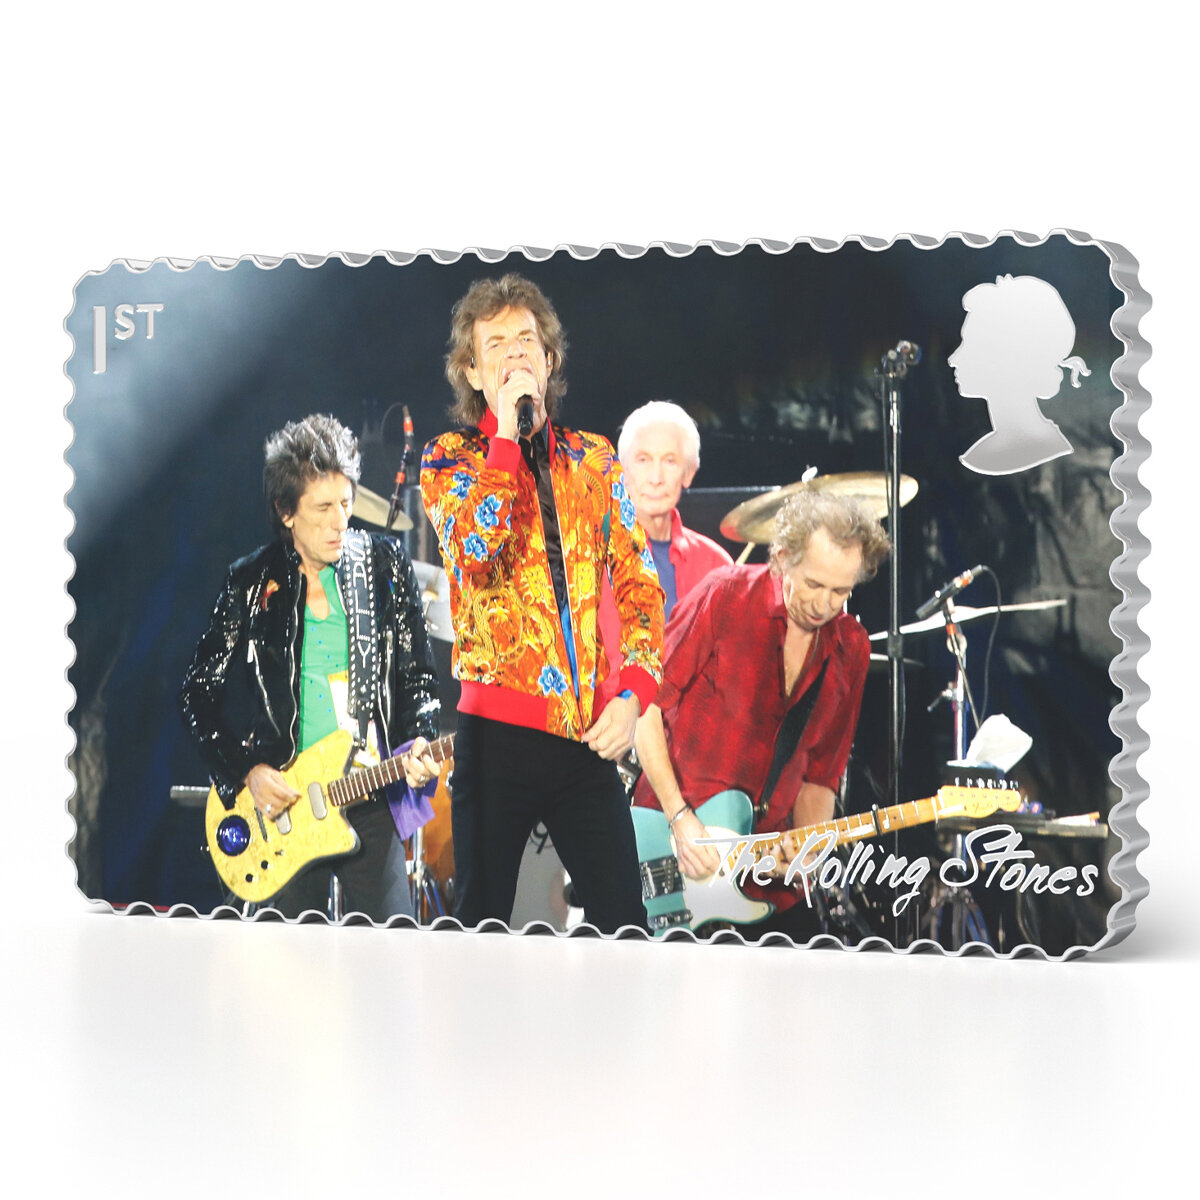 Buy The Rolling Stones Silver Stamp Ingot Back of Stamp Image at Costco.co.uk